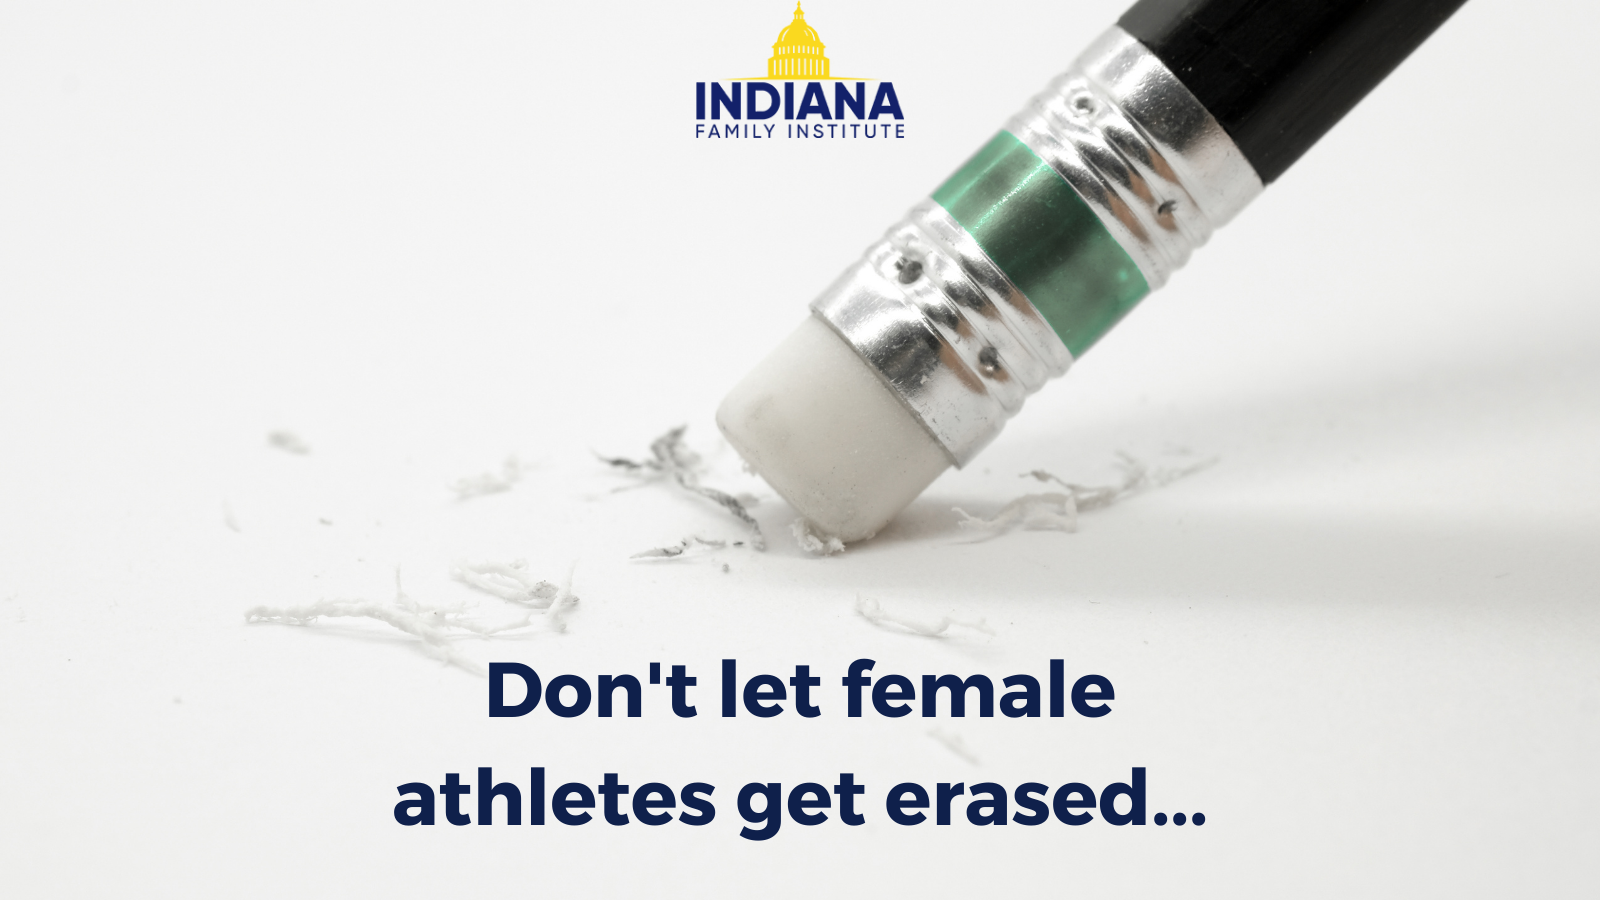 Four more states act to save women’s sports – Indiana must act, too